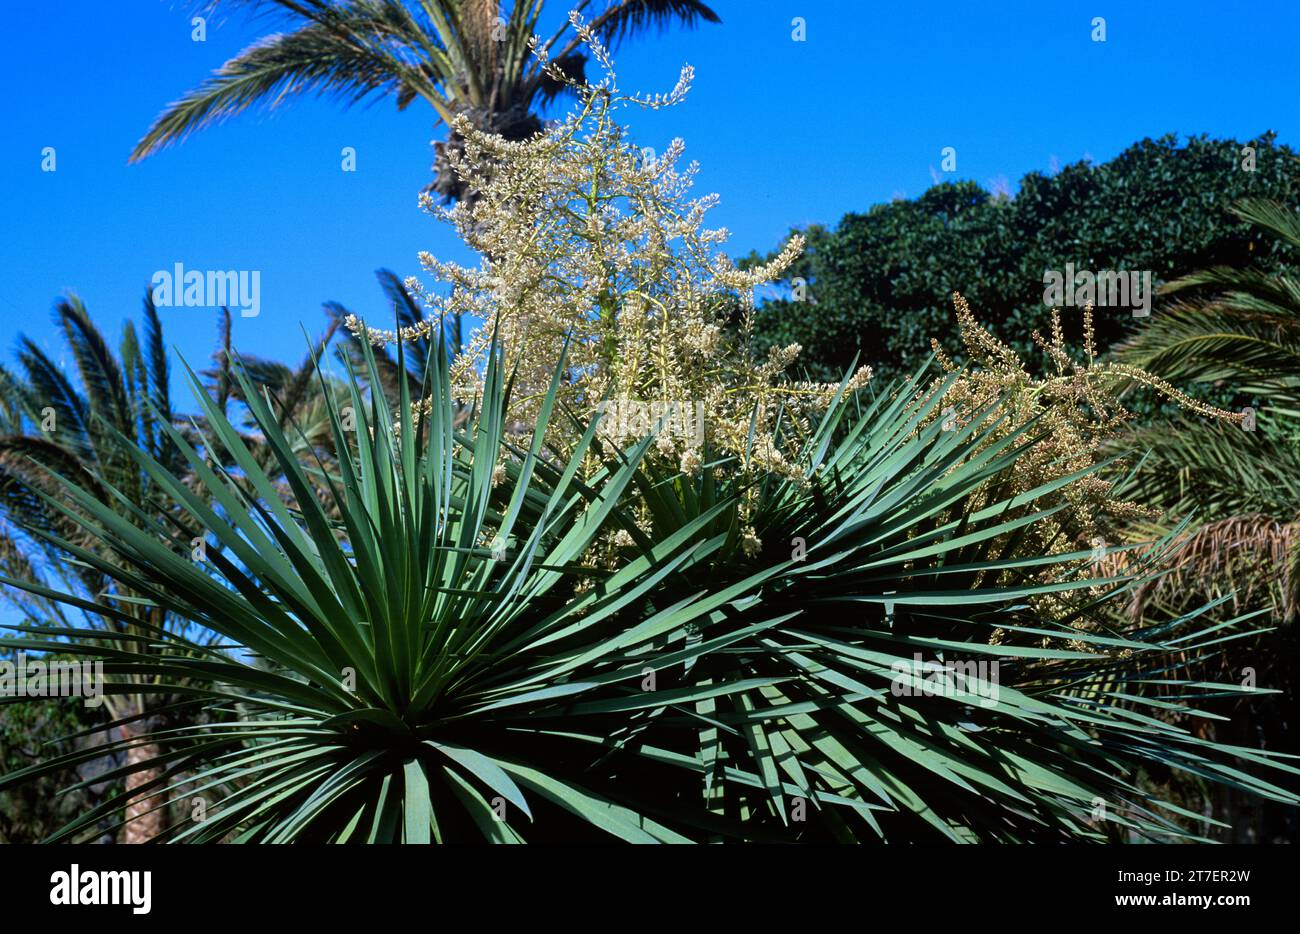 Drago (Dracaena draco) is a tree endemic to Canary Islands and Madeira. Flowers detail. Canary Islands, Spain. Stock Photo